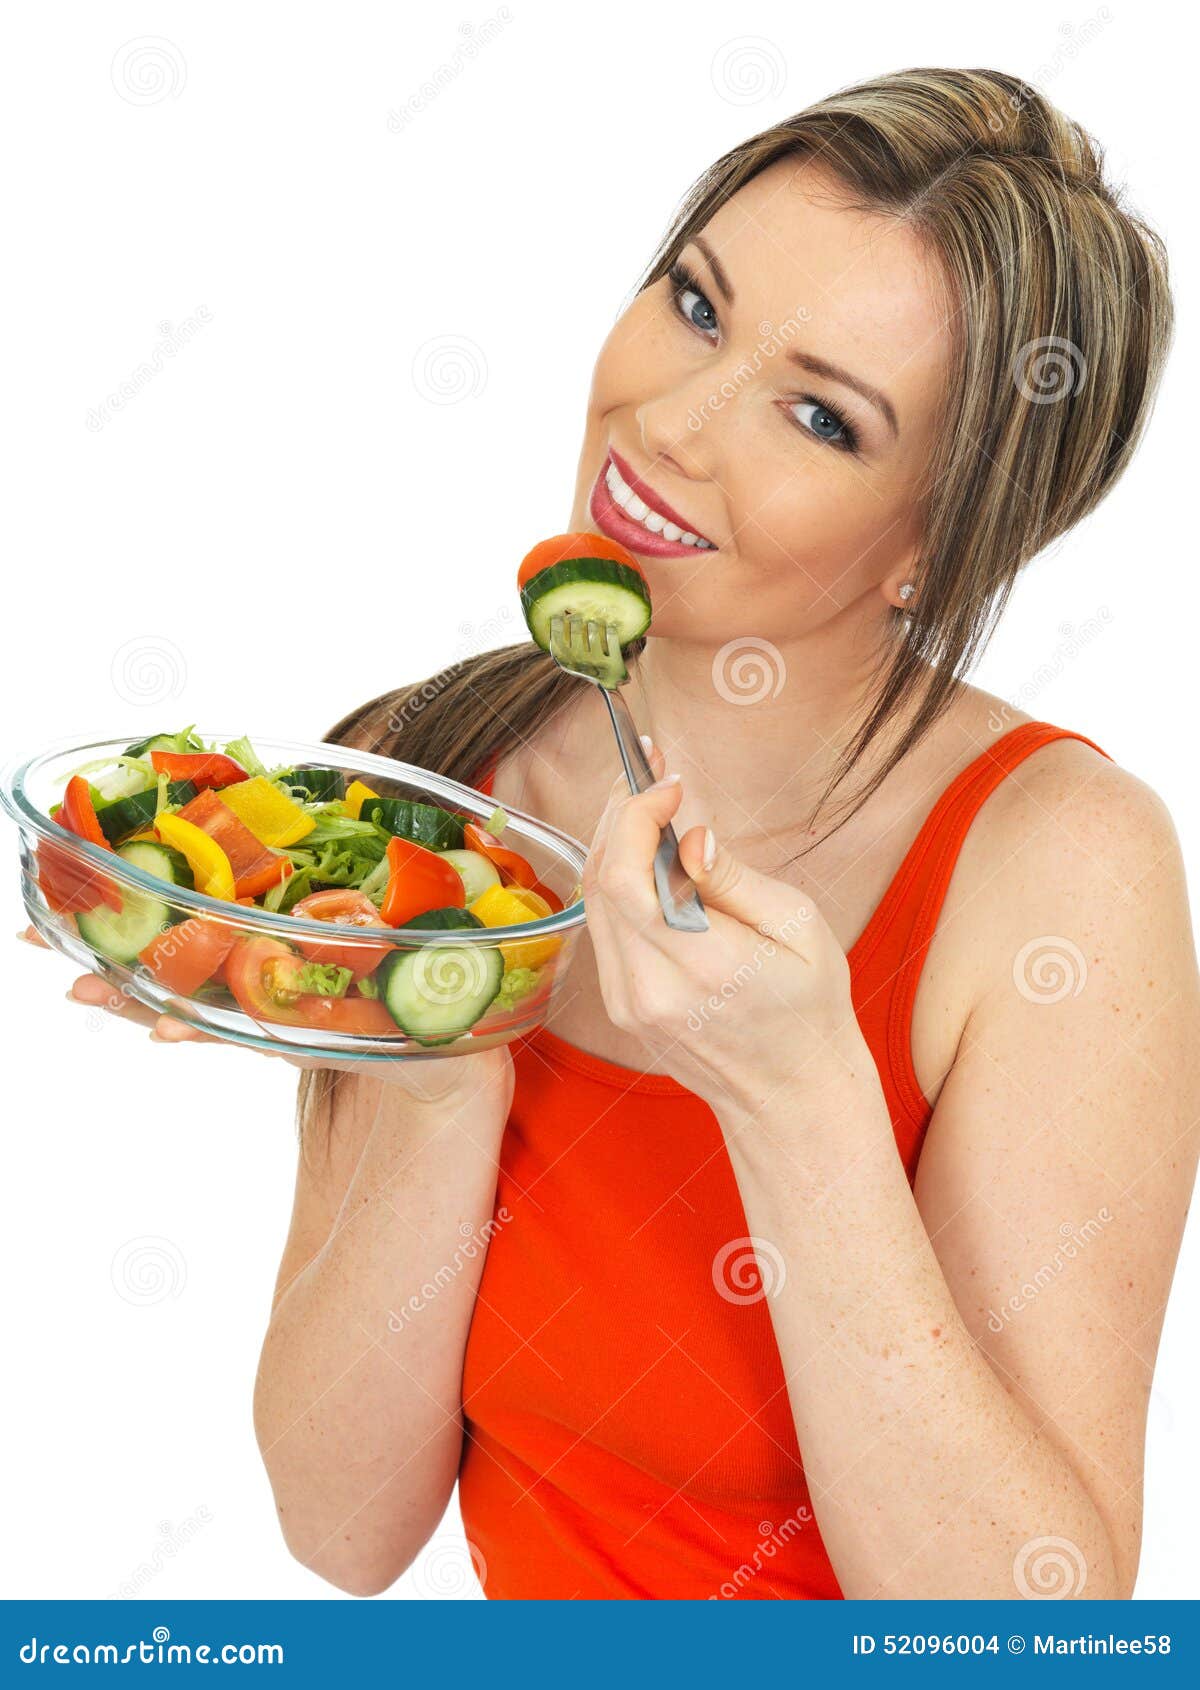 Young Happy healthy Woman Eating a Fresh Mixed Garden Salad. A DSLR royalty free image, a young healthy happy attractive woman, holding and eating a freshly mixed garden salad, smiling towards the camera, wearing a red or orange vest top, shot against a white background.